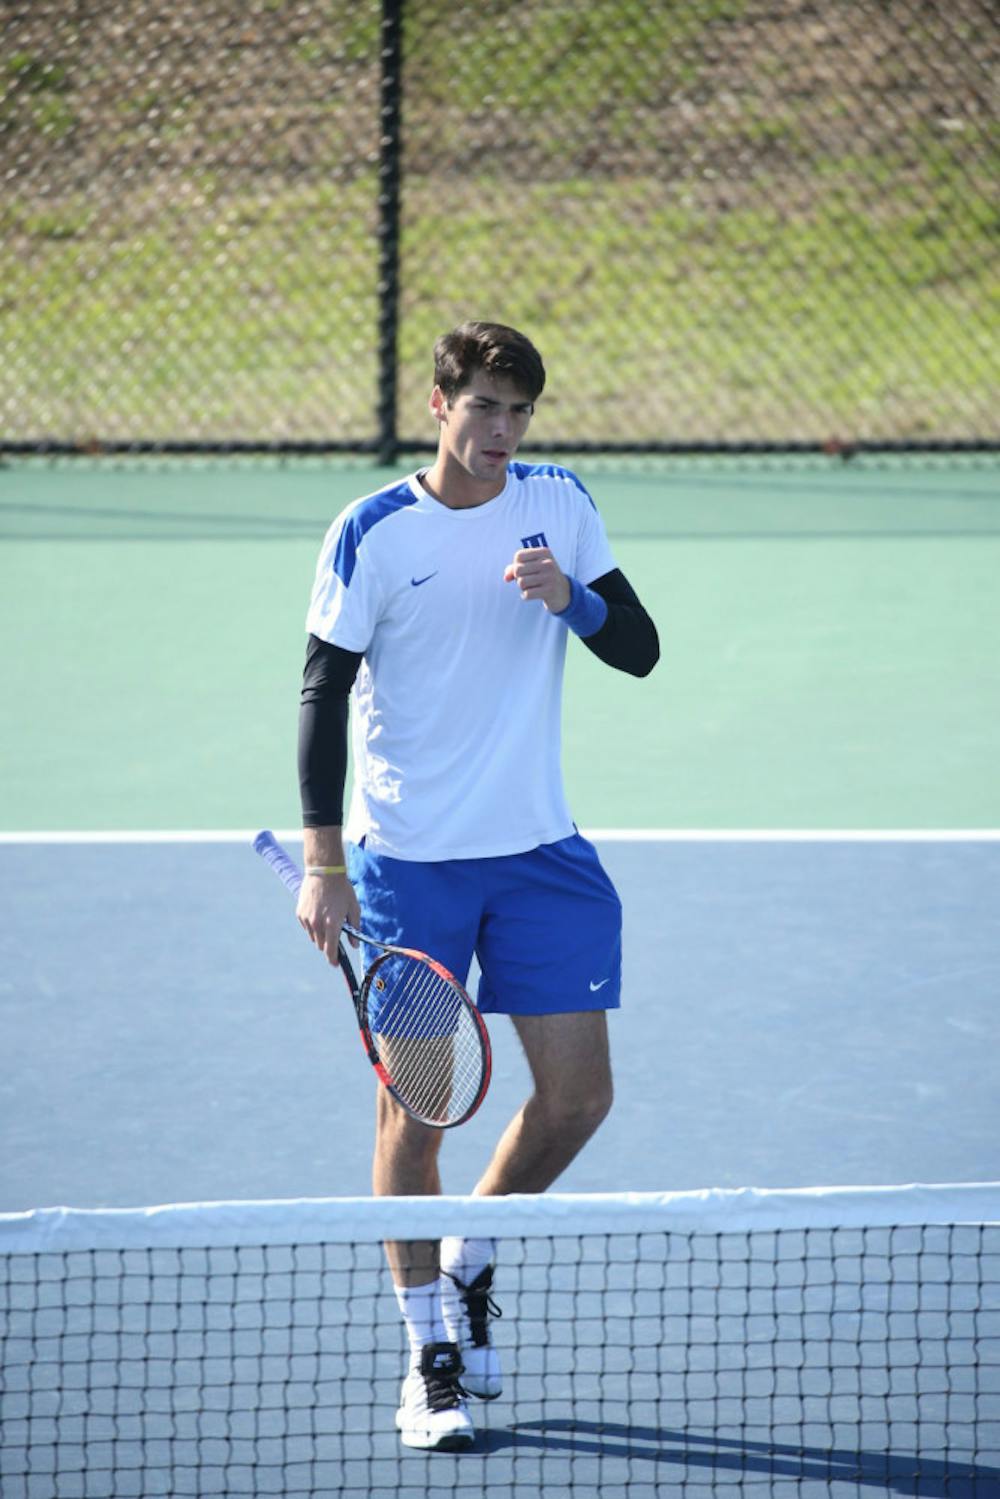 <p>Andrew Watson is one of the leaders of the men’s team as one of the four upperclassmen. He is currently ranked as the No. 111 player in men’s tennis.&nbsp;</p>